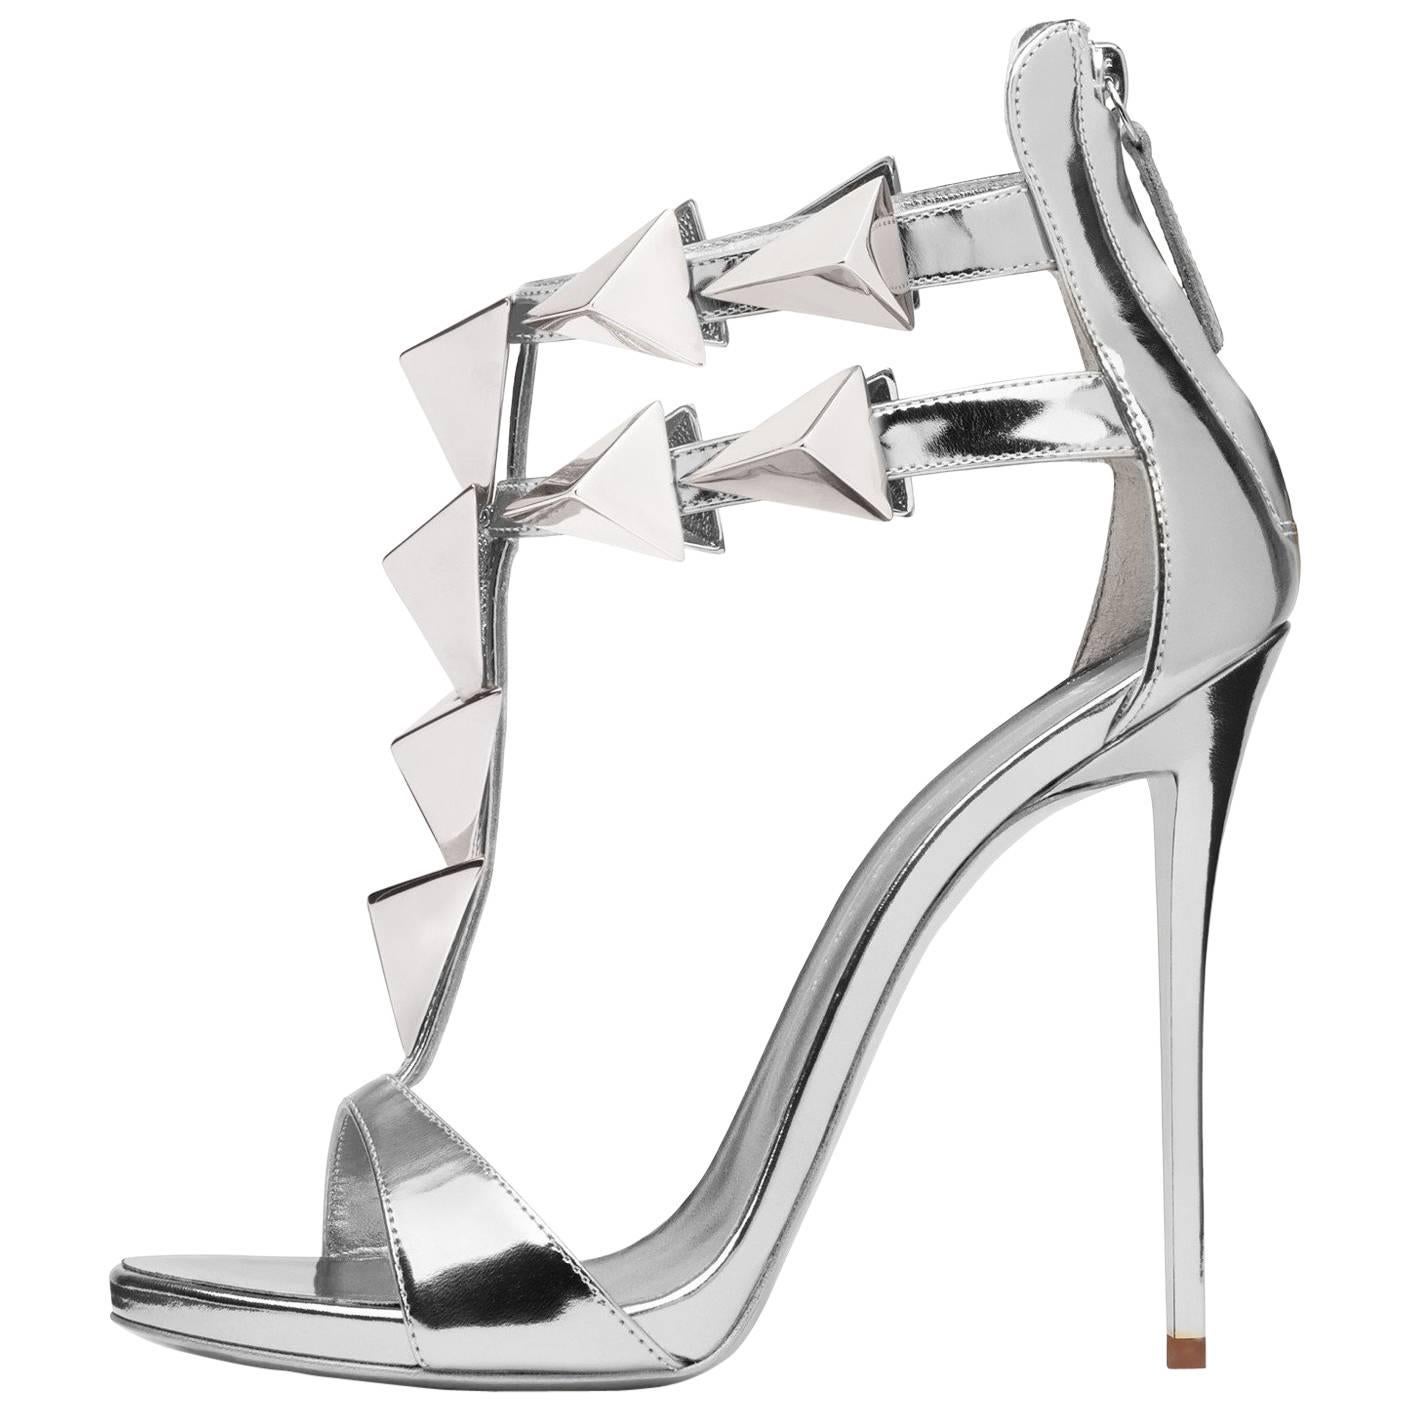 Giuseppe Zanotti New Silver Patent Leather Metal Evening Sandals Heels in Box